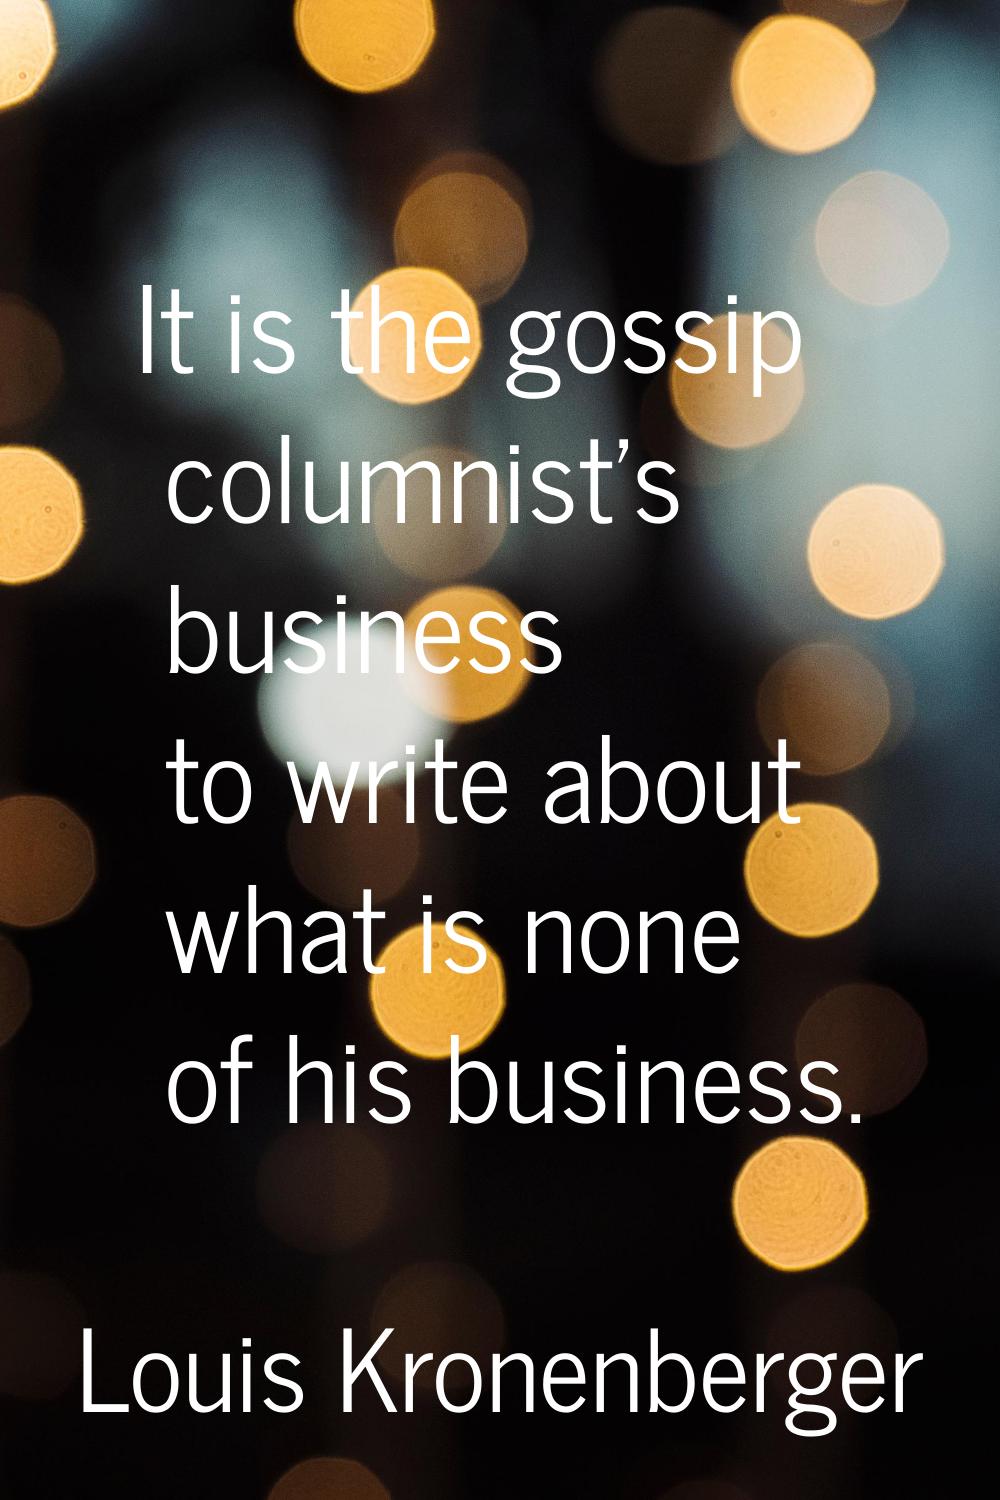 It is the gossip columnist's business to write about what is none of his business.